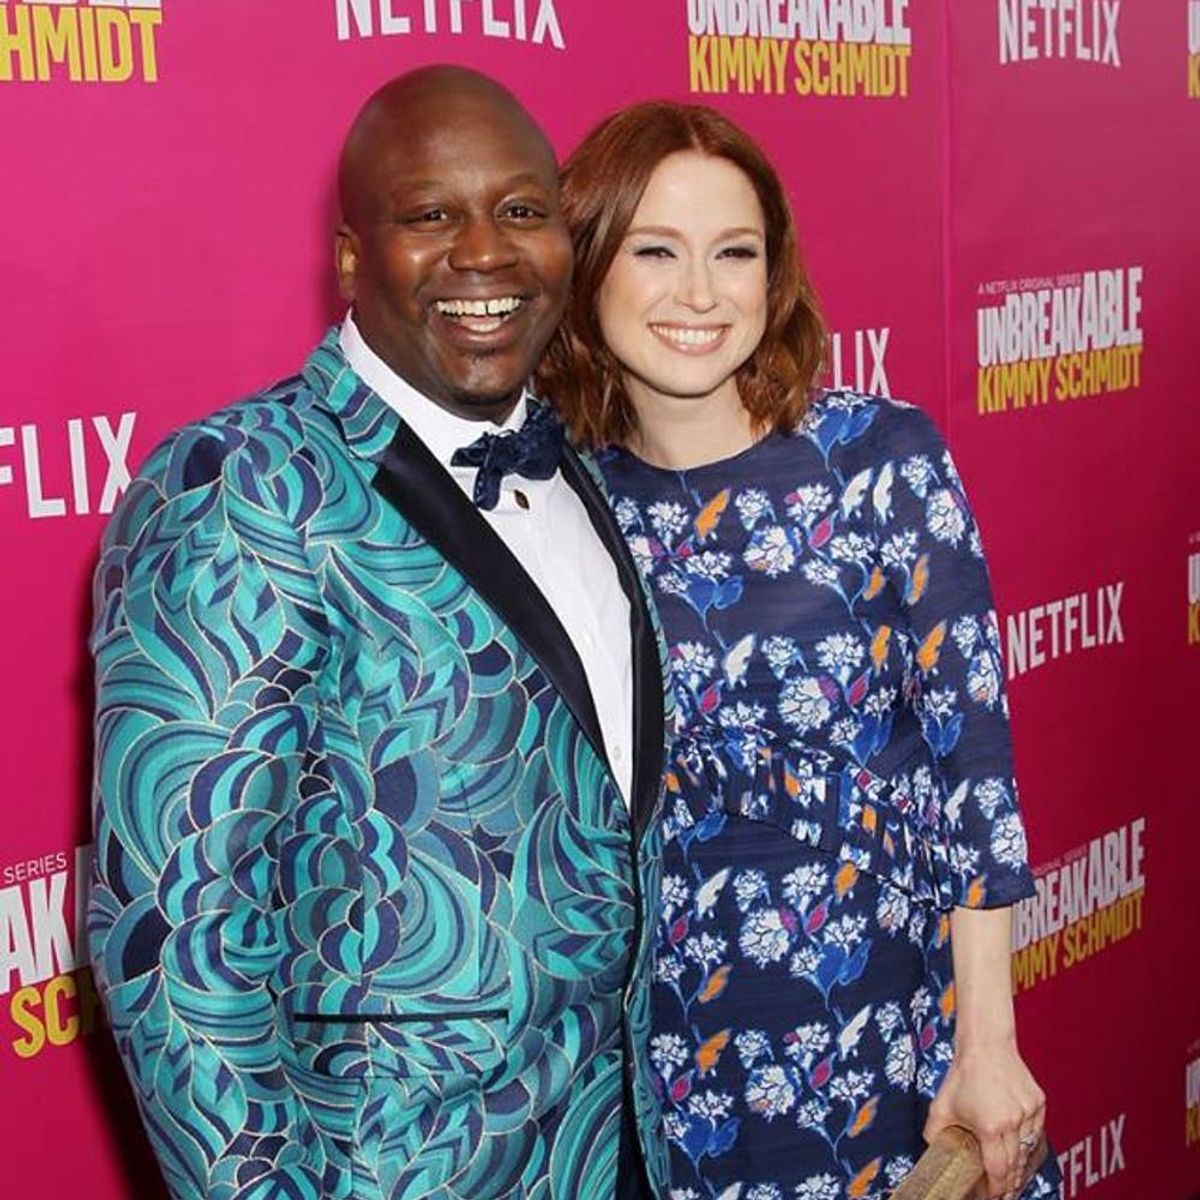 Ellie Kemper’s Co-Star Just Revealed the Sex of Her Newborn Baby